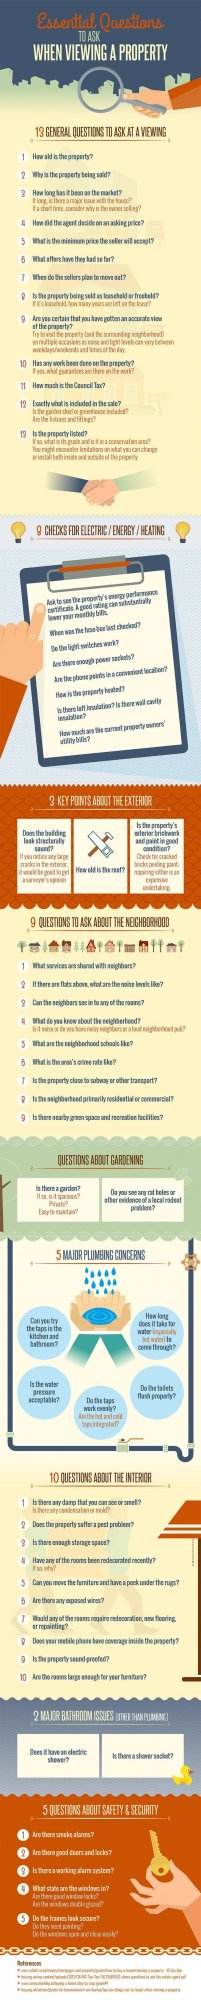 57 Important Questions To Ask When Viewing A Property For Sale